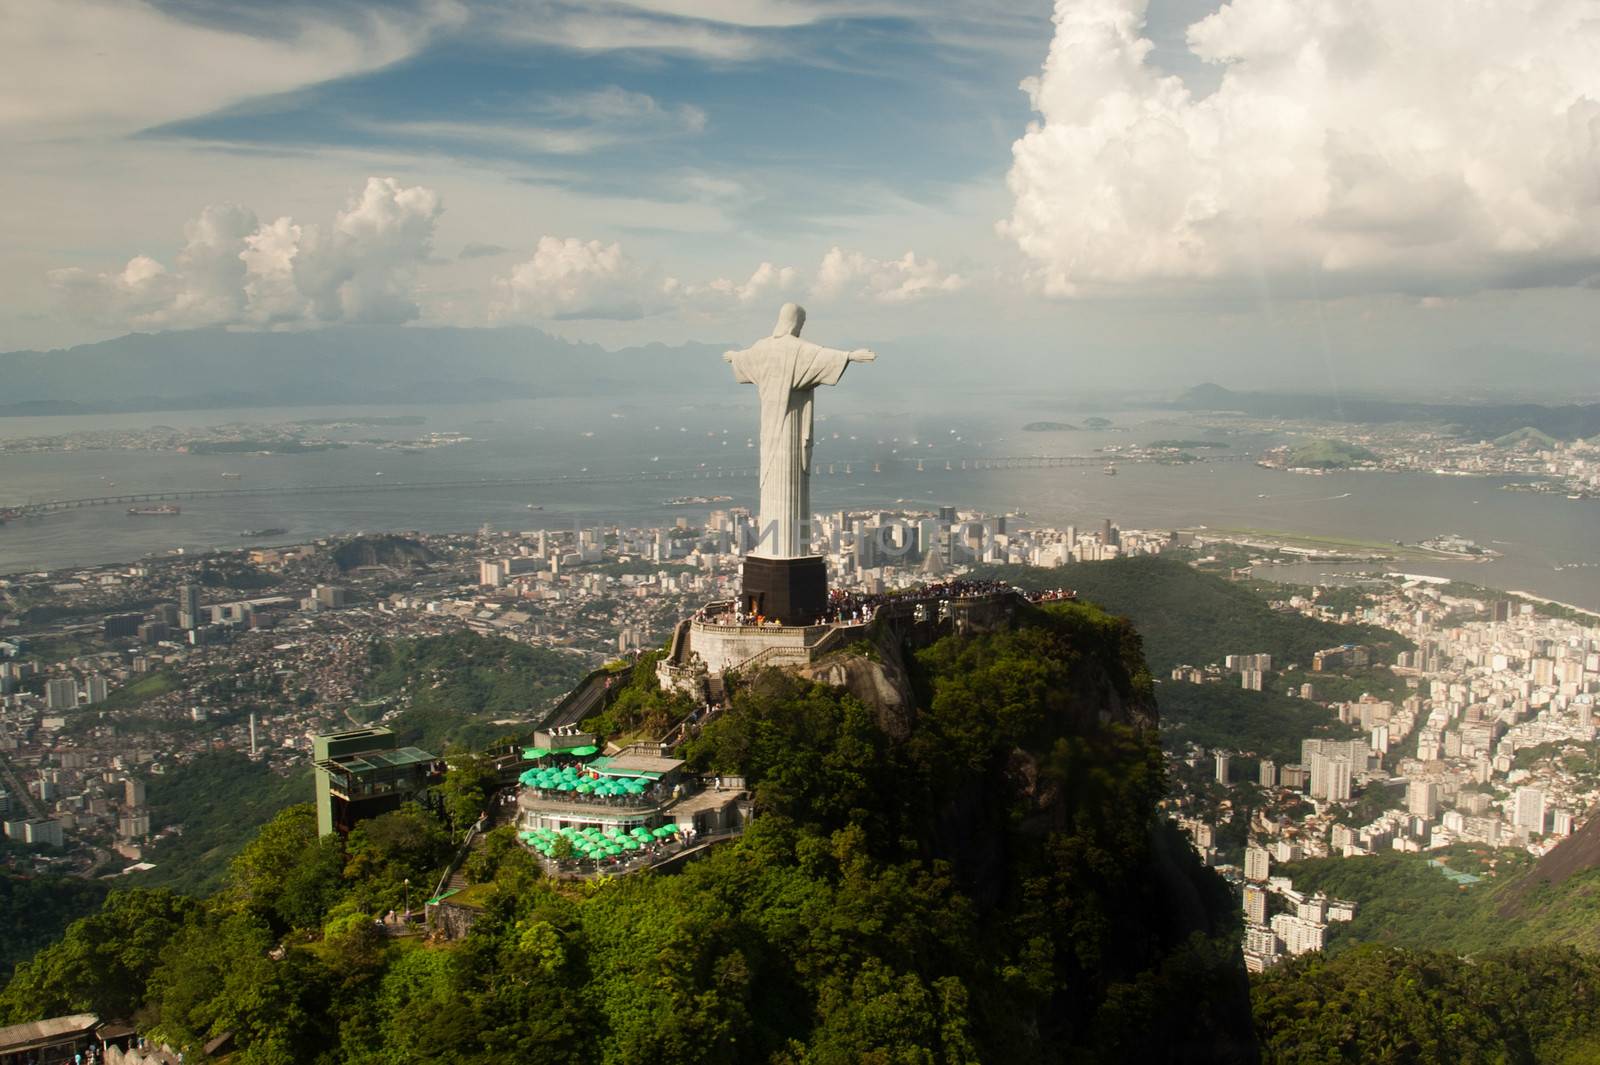 Christ the Redeemer statue by CelsoDiniz